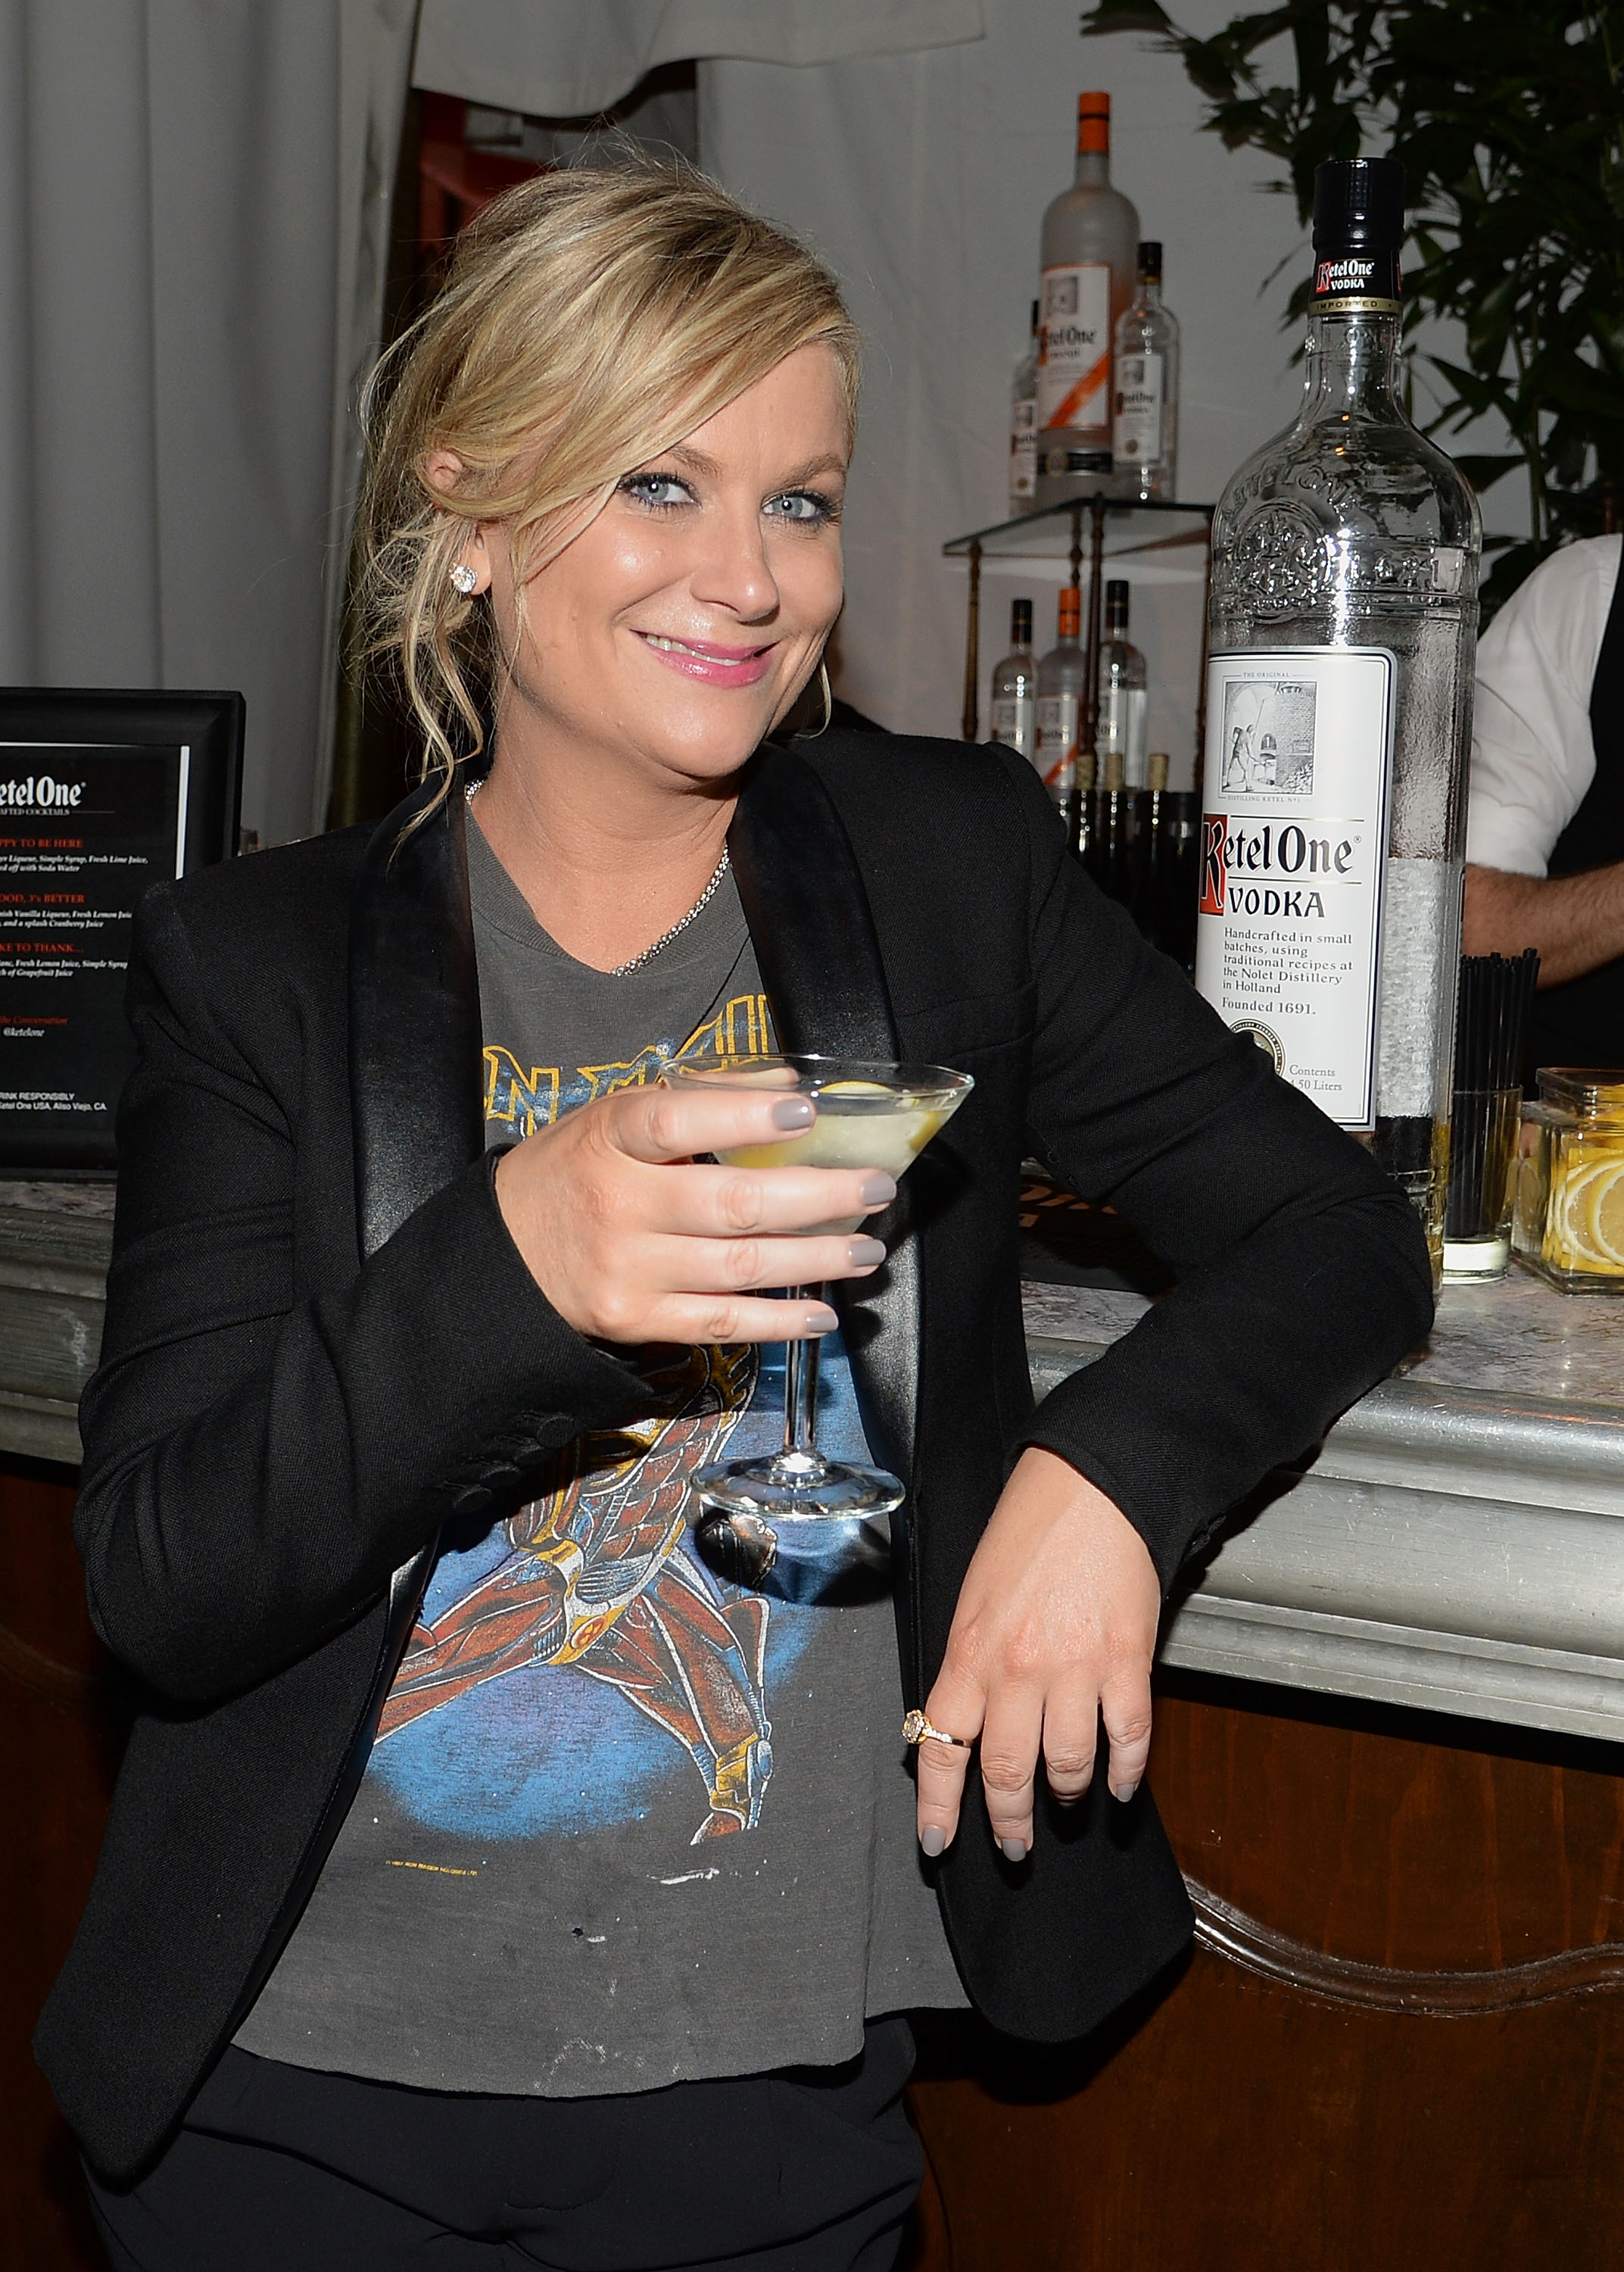 Amy Poehler And Guests Enjoy Ketel One Vodka Cocktails At Her And Tina Fey's Annual Golden Globes After Party